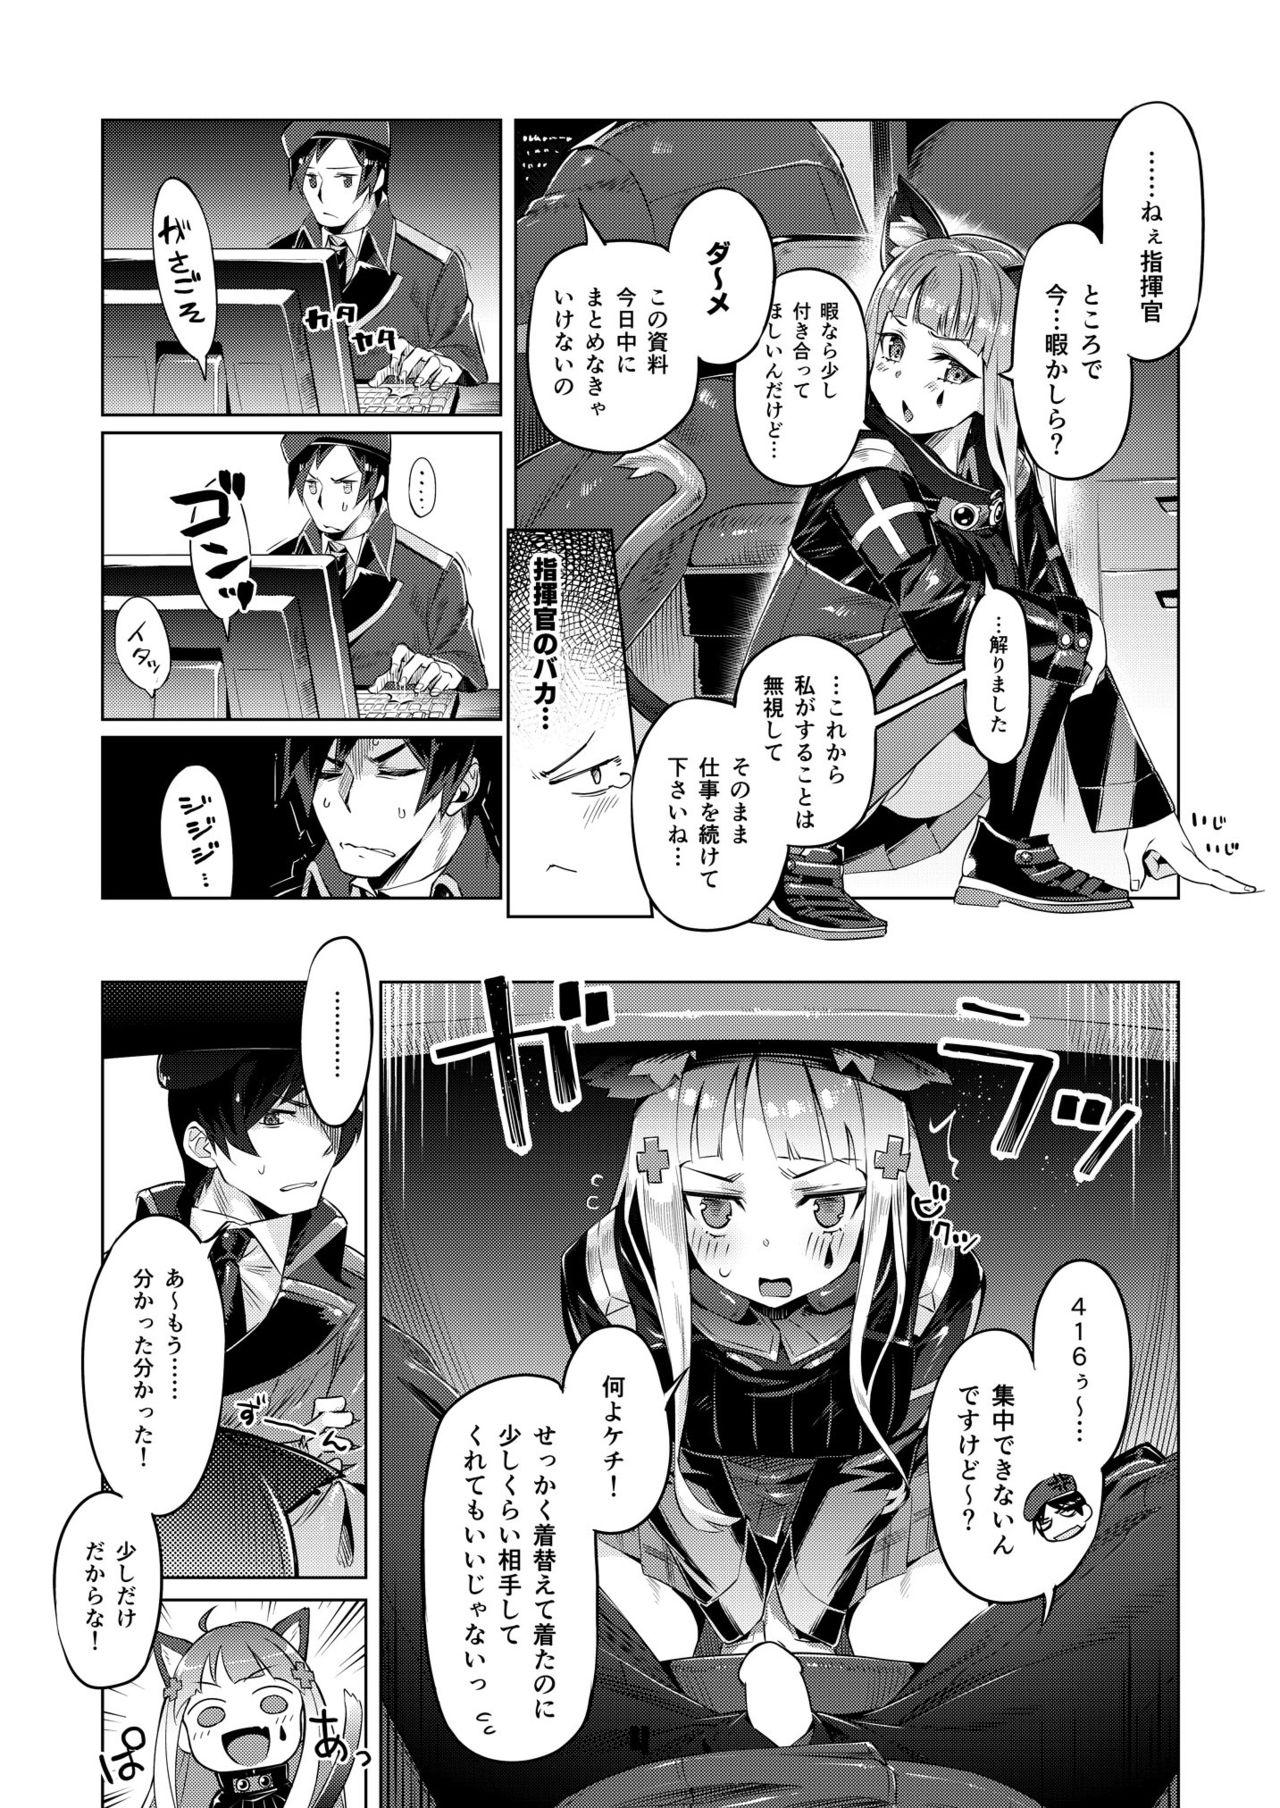 With Nekomimi Attachment - Girls frontline Ass Fucking - Page 4